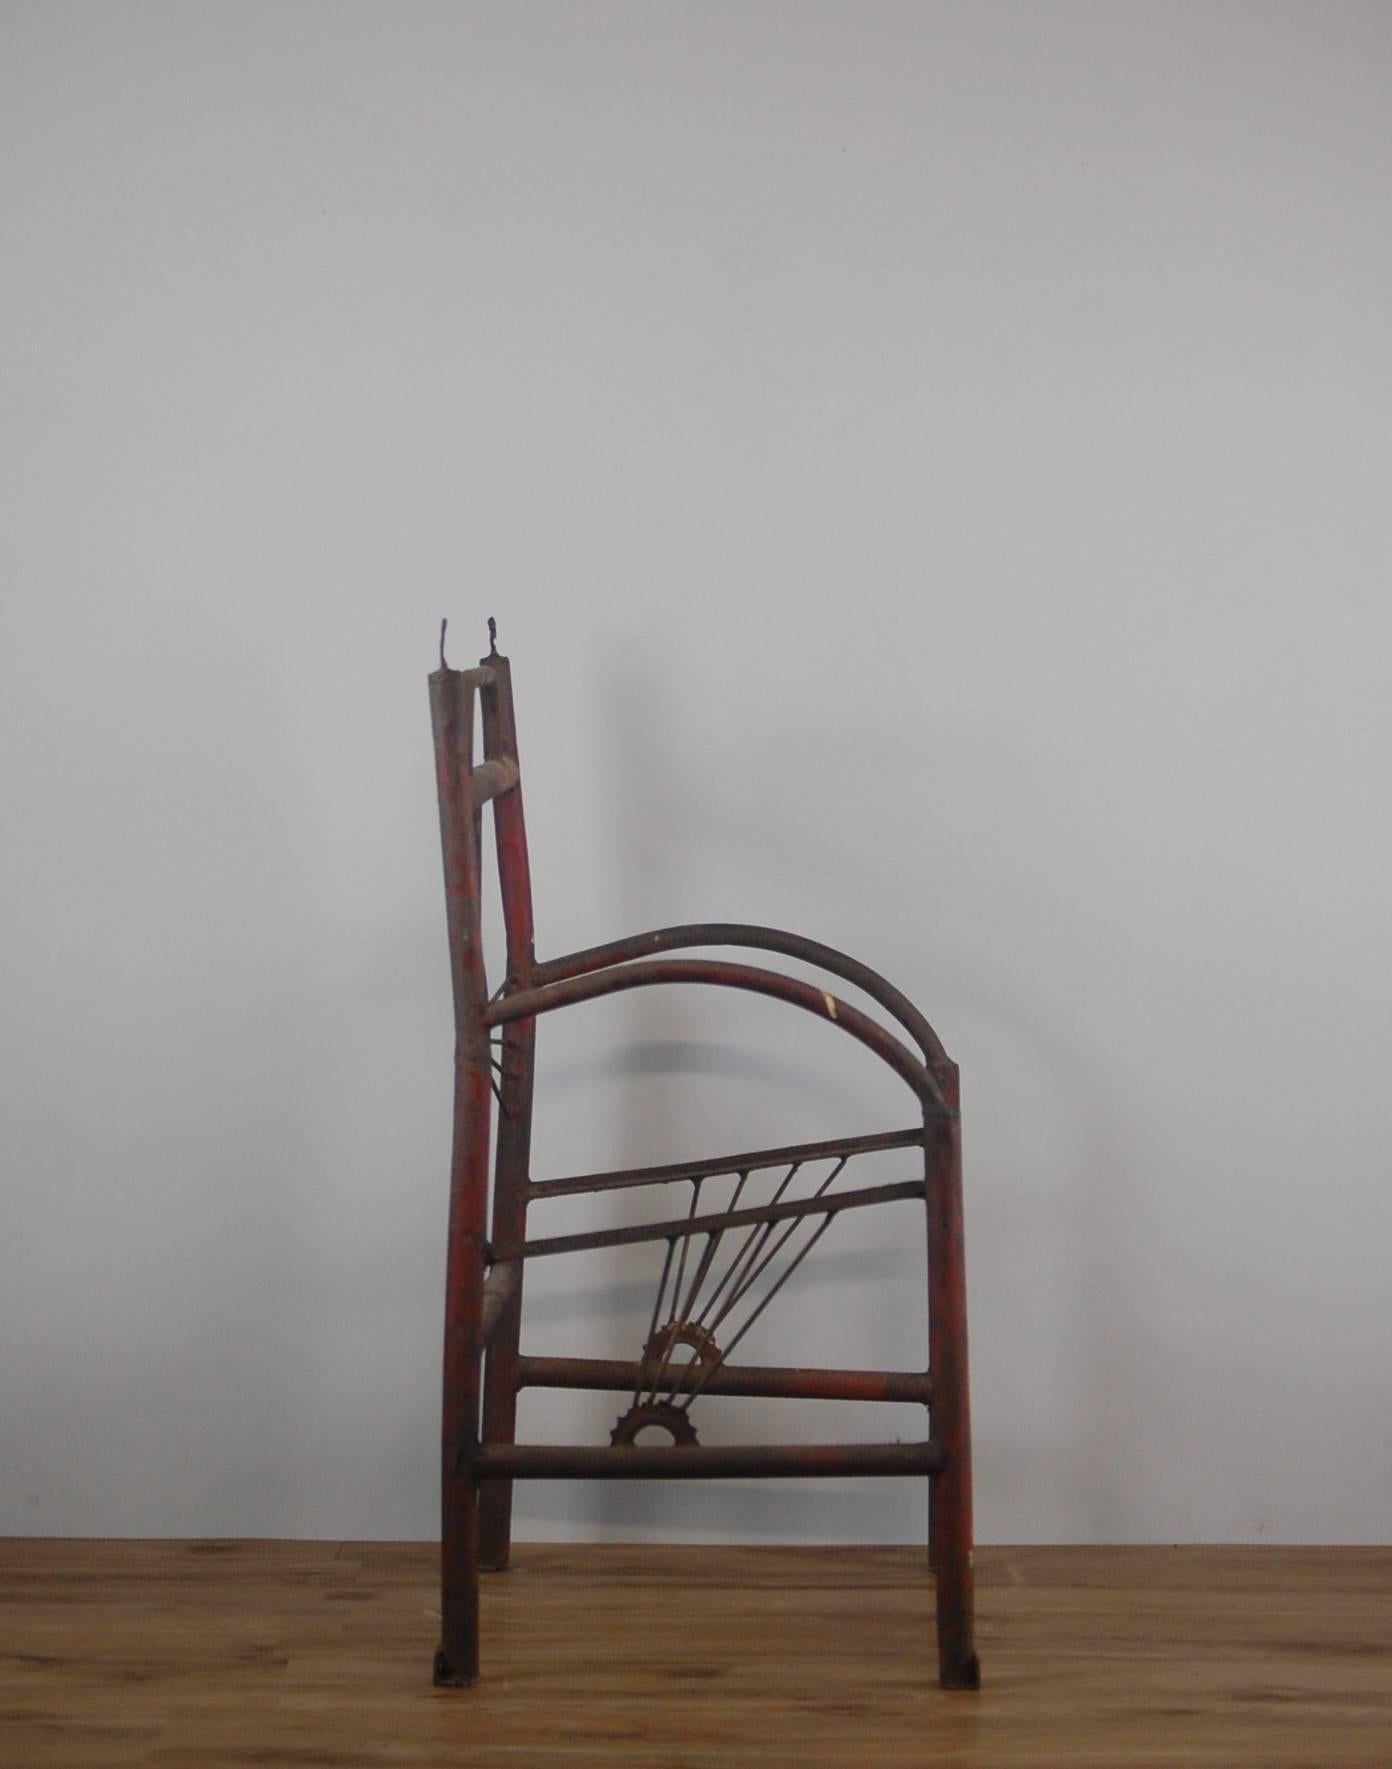 Wonderfully primitive chair constructed from bicycle parts, Lincolnshire England, circa 1915. Used later as advertising display piece in a bicycle store. Remnant original paint, lightly waxed. Decorative display piece.